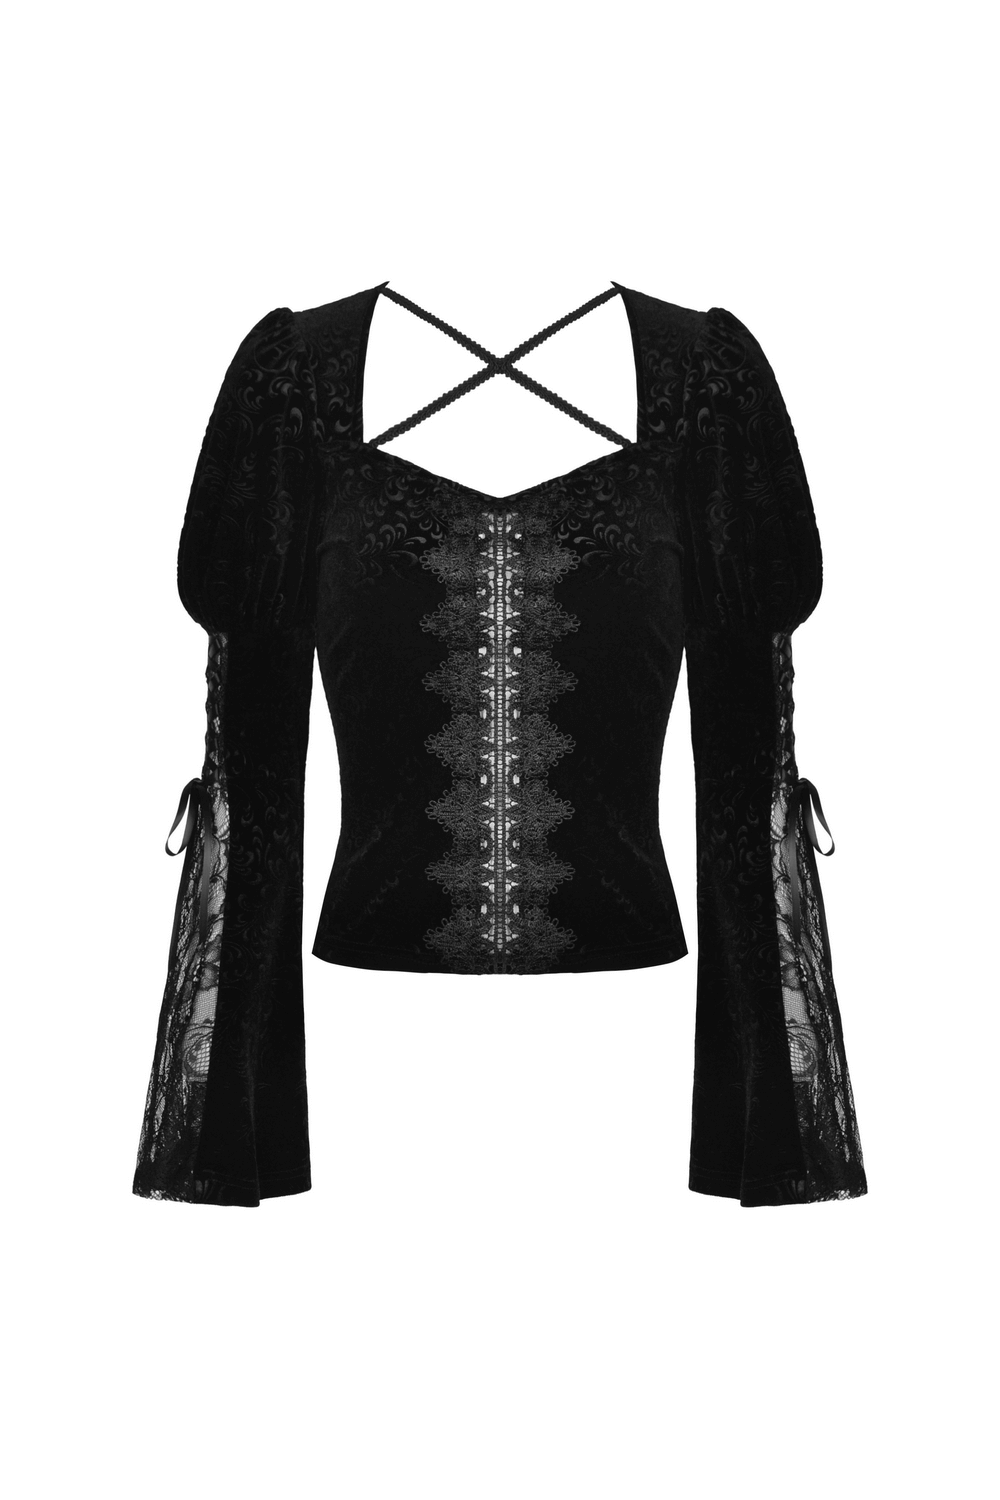 Vintage Velvet Cropped Top with Sheer Lace Bell Sleeves